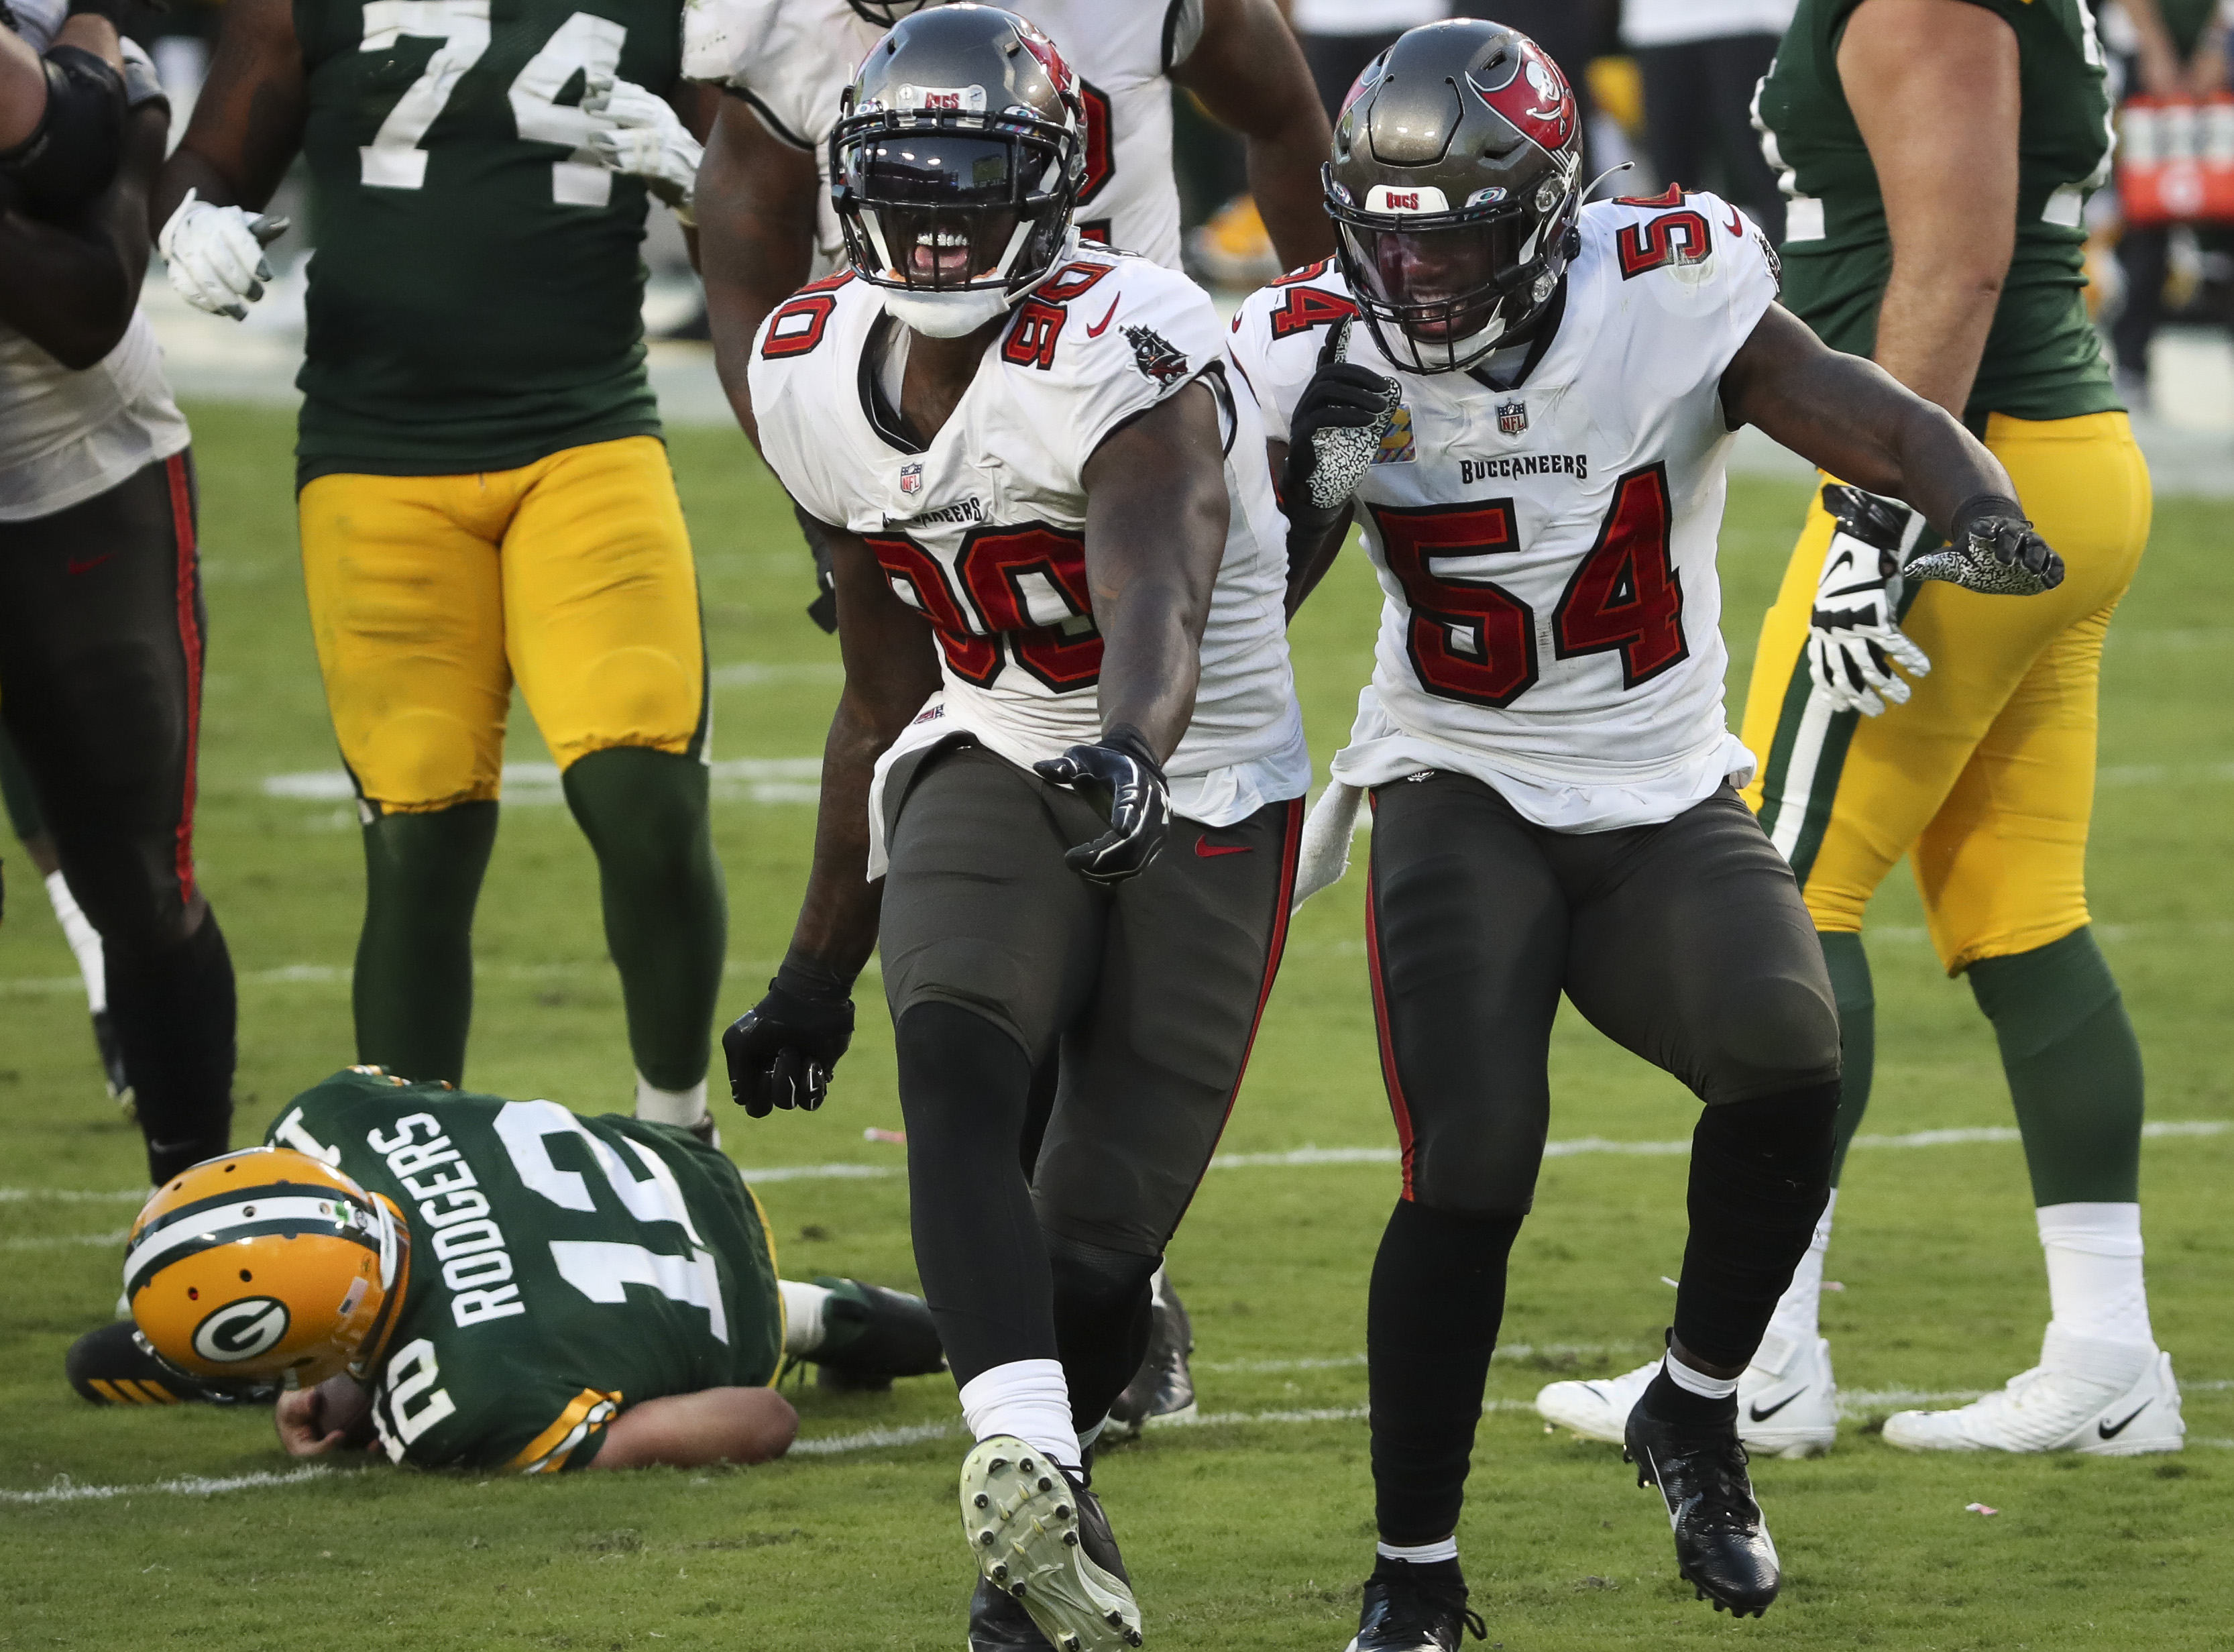 Put some respect on the Buccaneers': Twitter reacts to rout of Packers